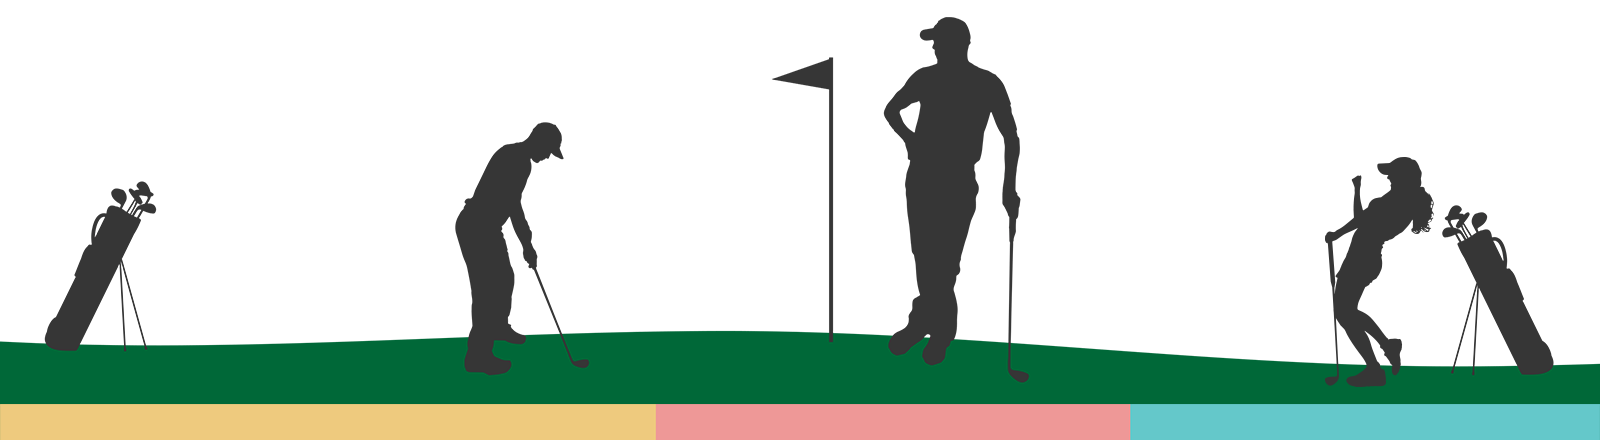 Graphic illustration with golfers at a tournament.